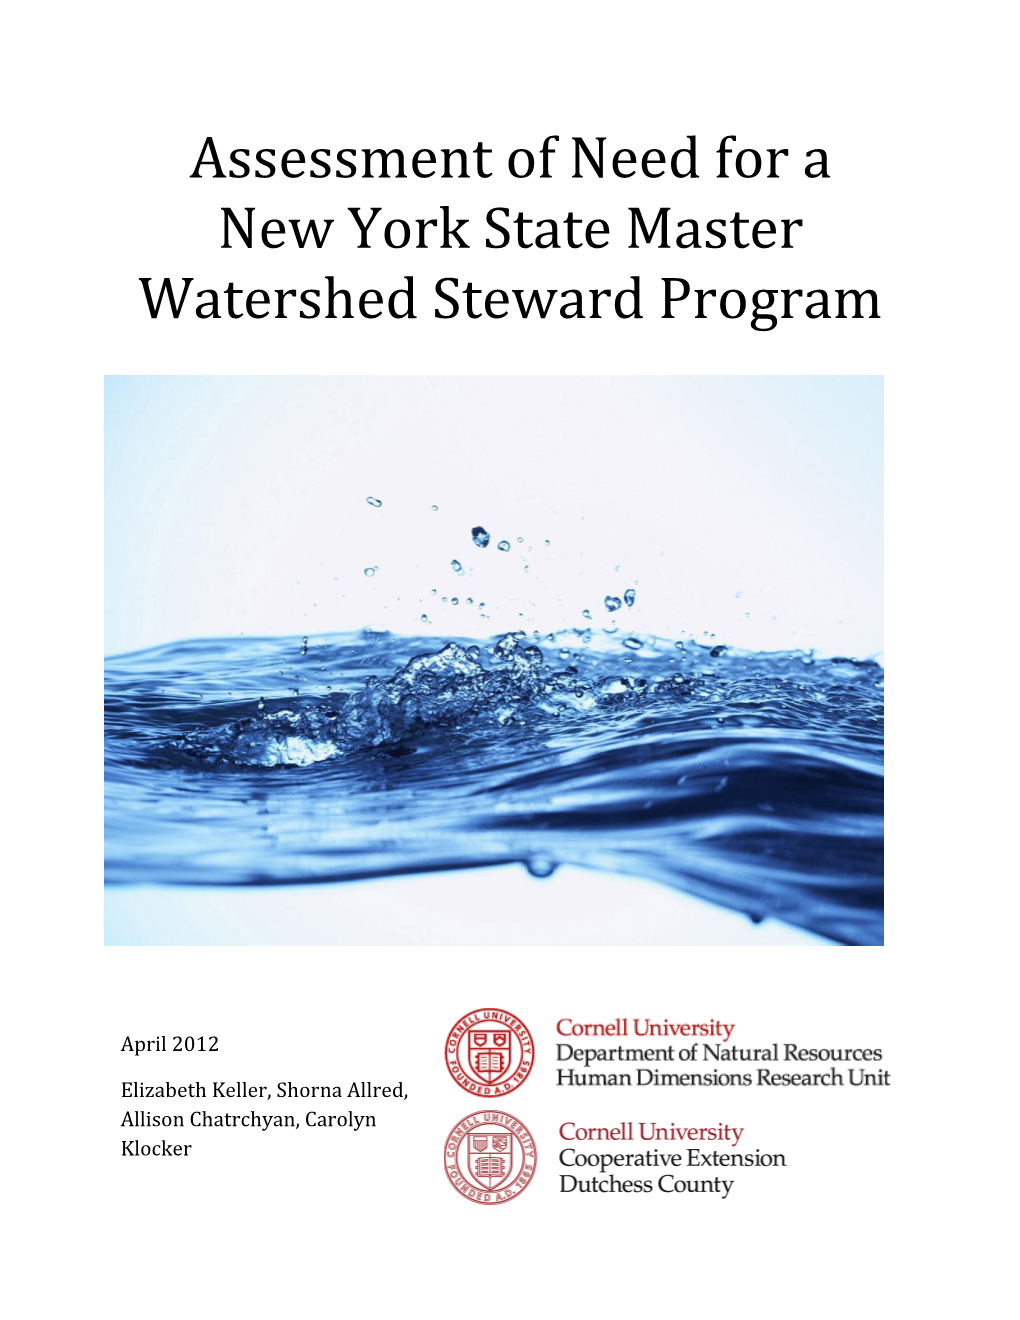 Assessment of Need for a New York State Master Watershed Steward Program